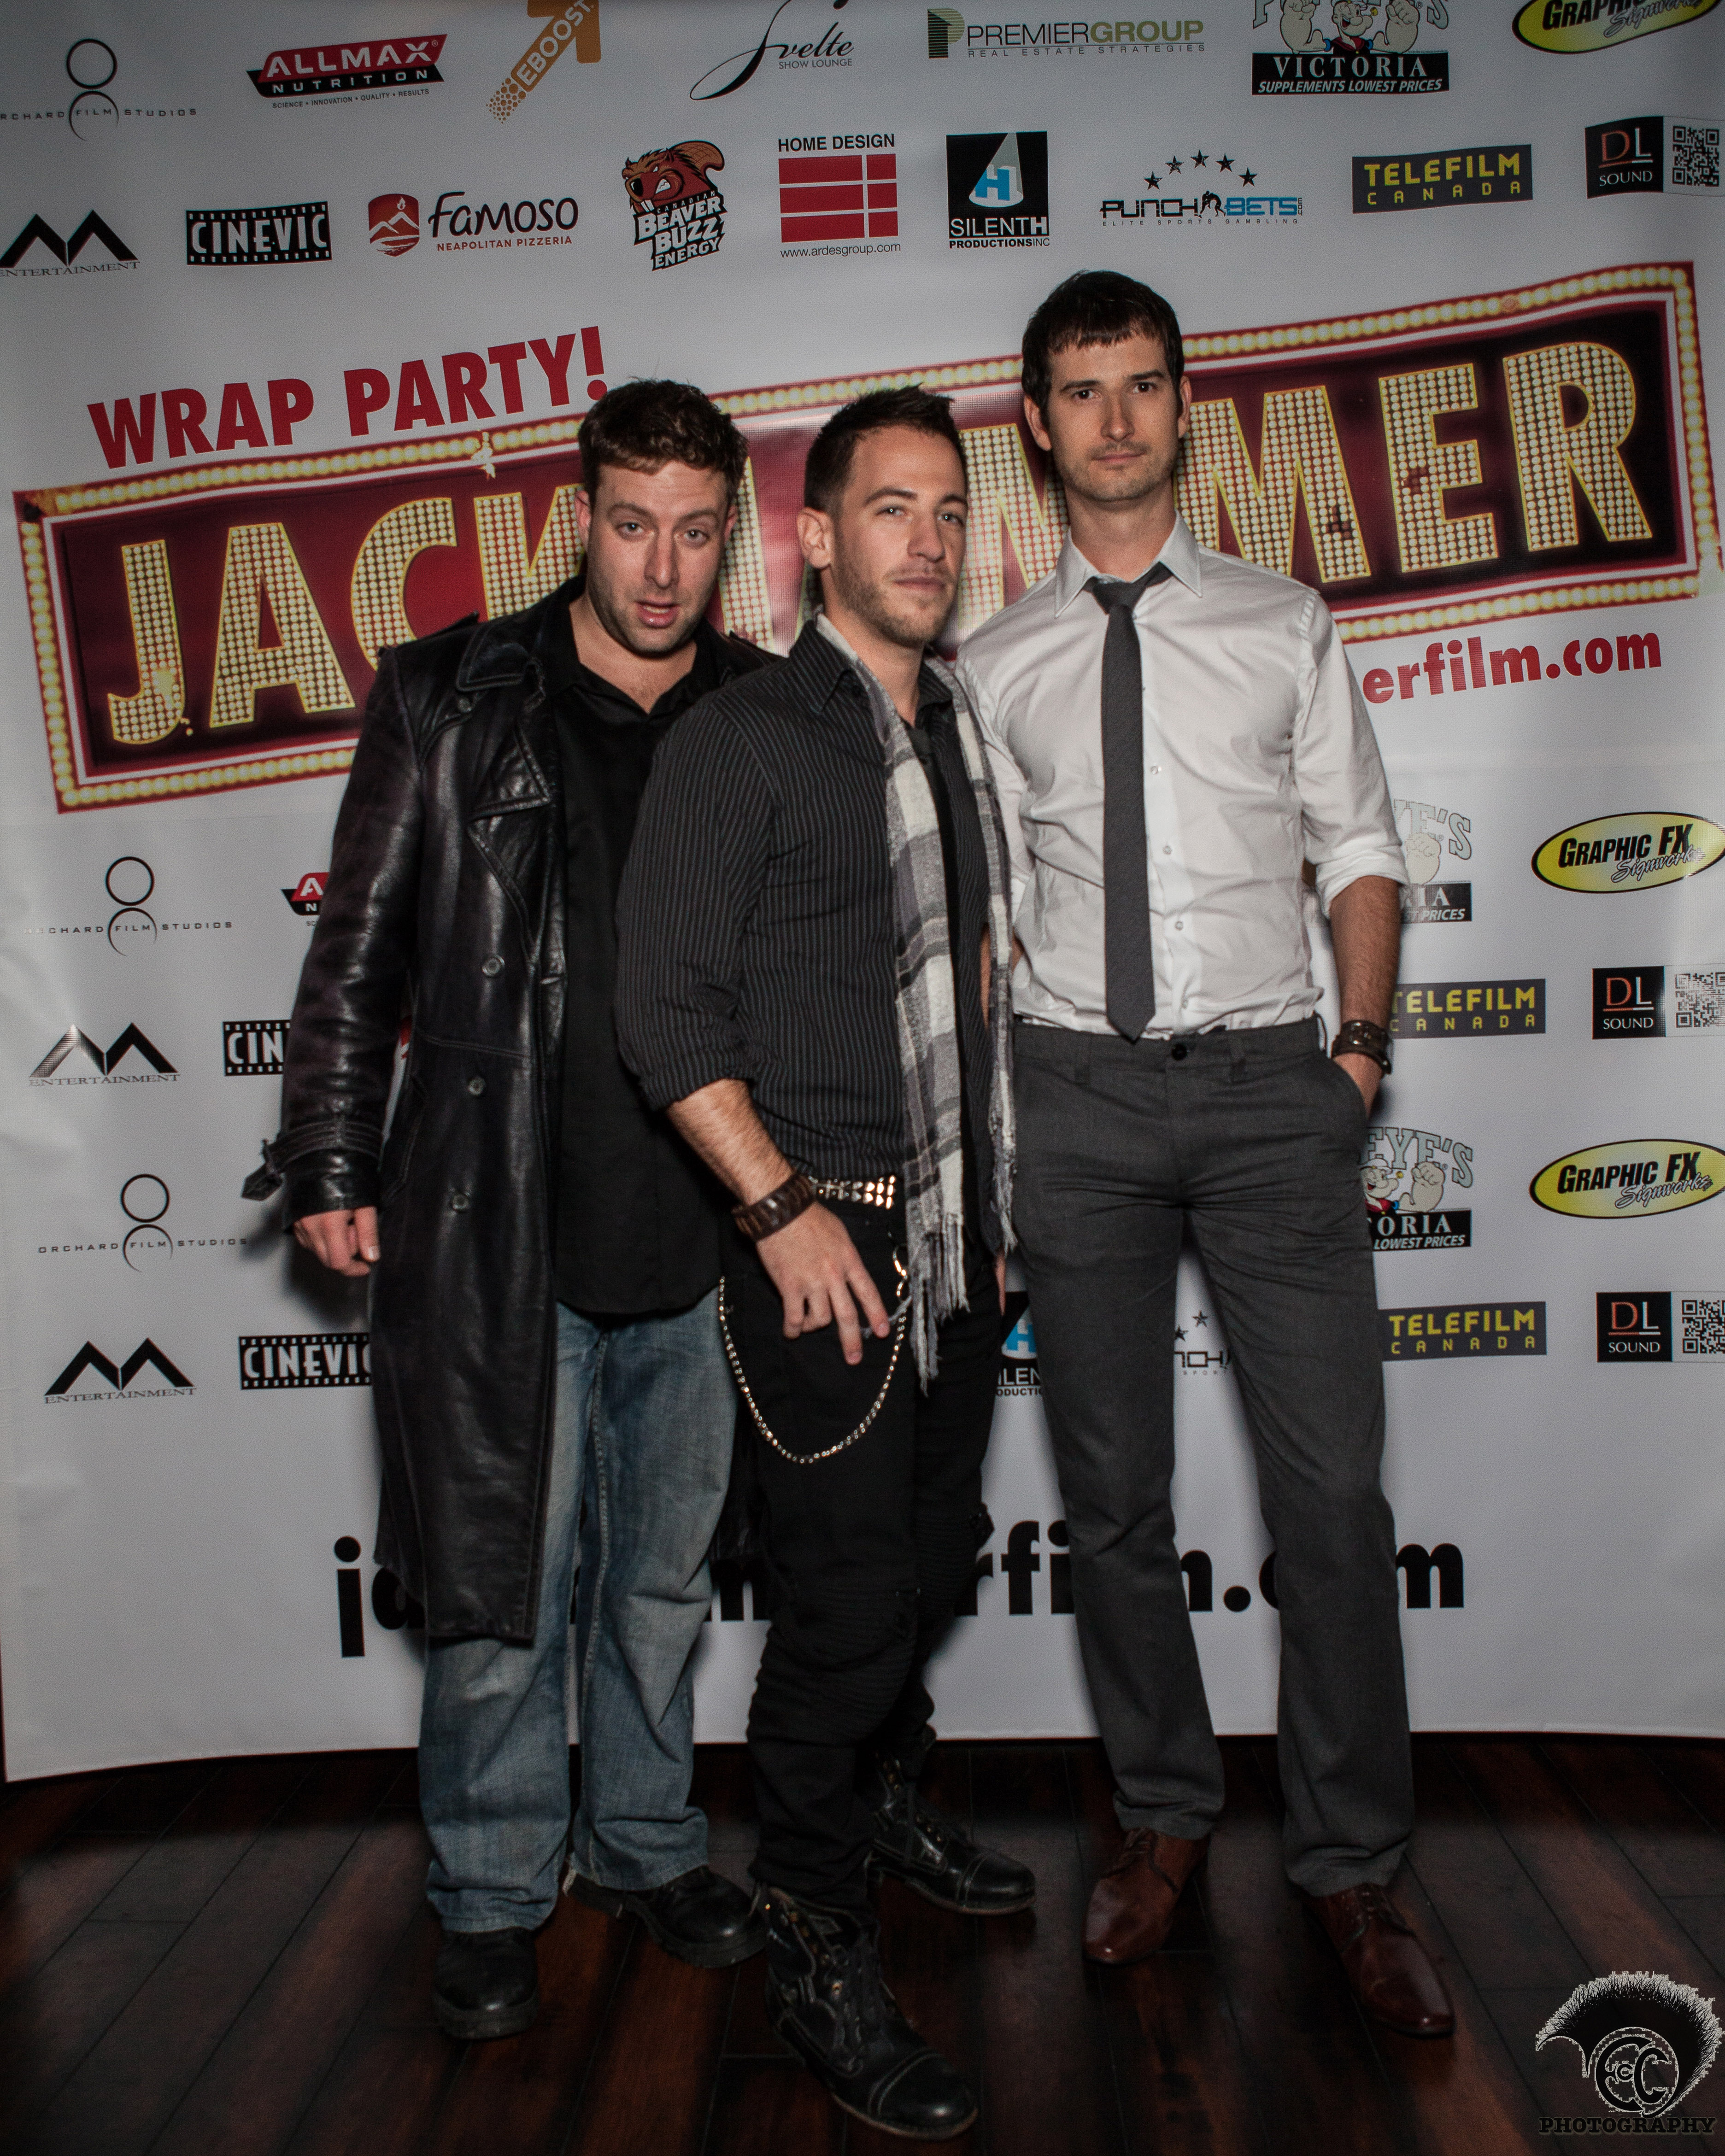 Mark Adam Zeifman showing support with cast members Guy Christie and Julian Paul. at the Screening and wrap party of 